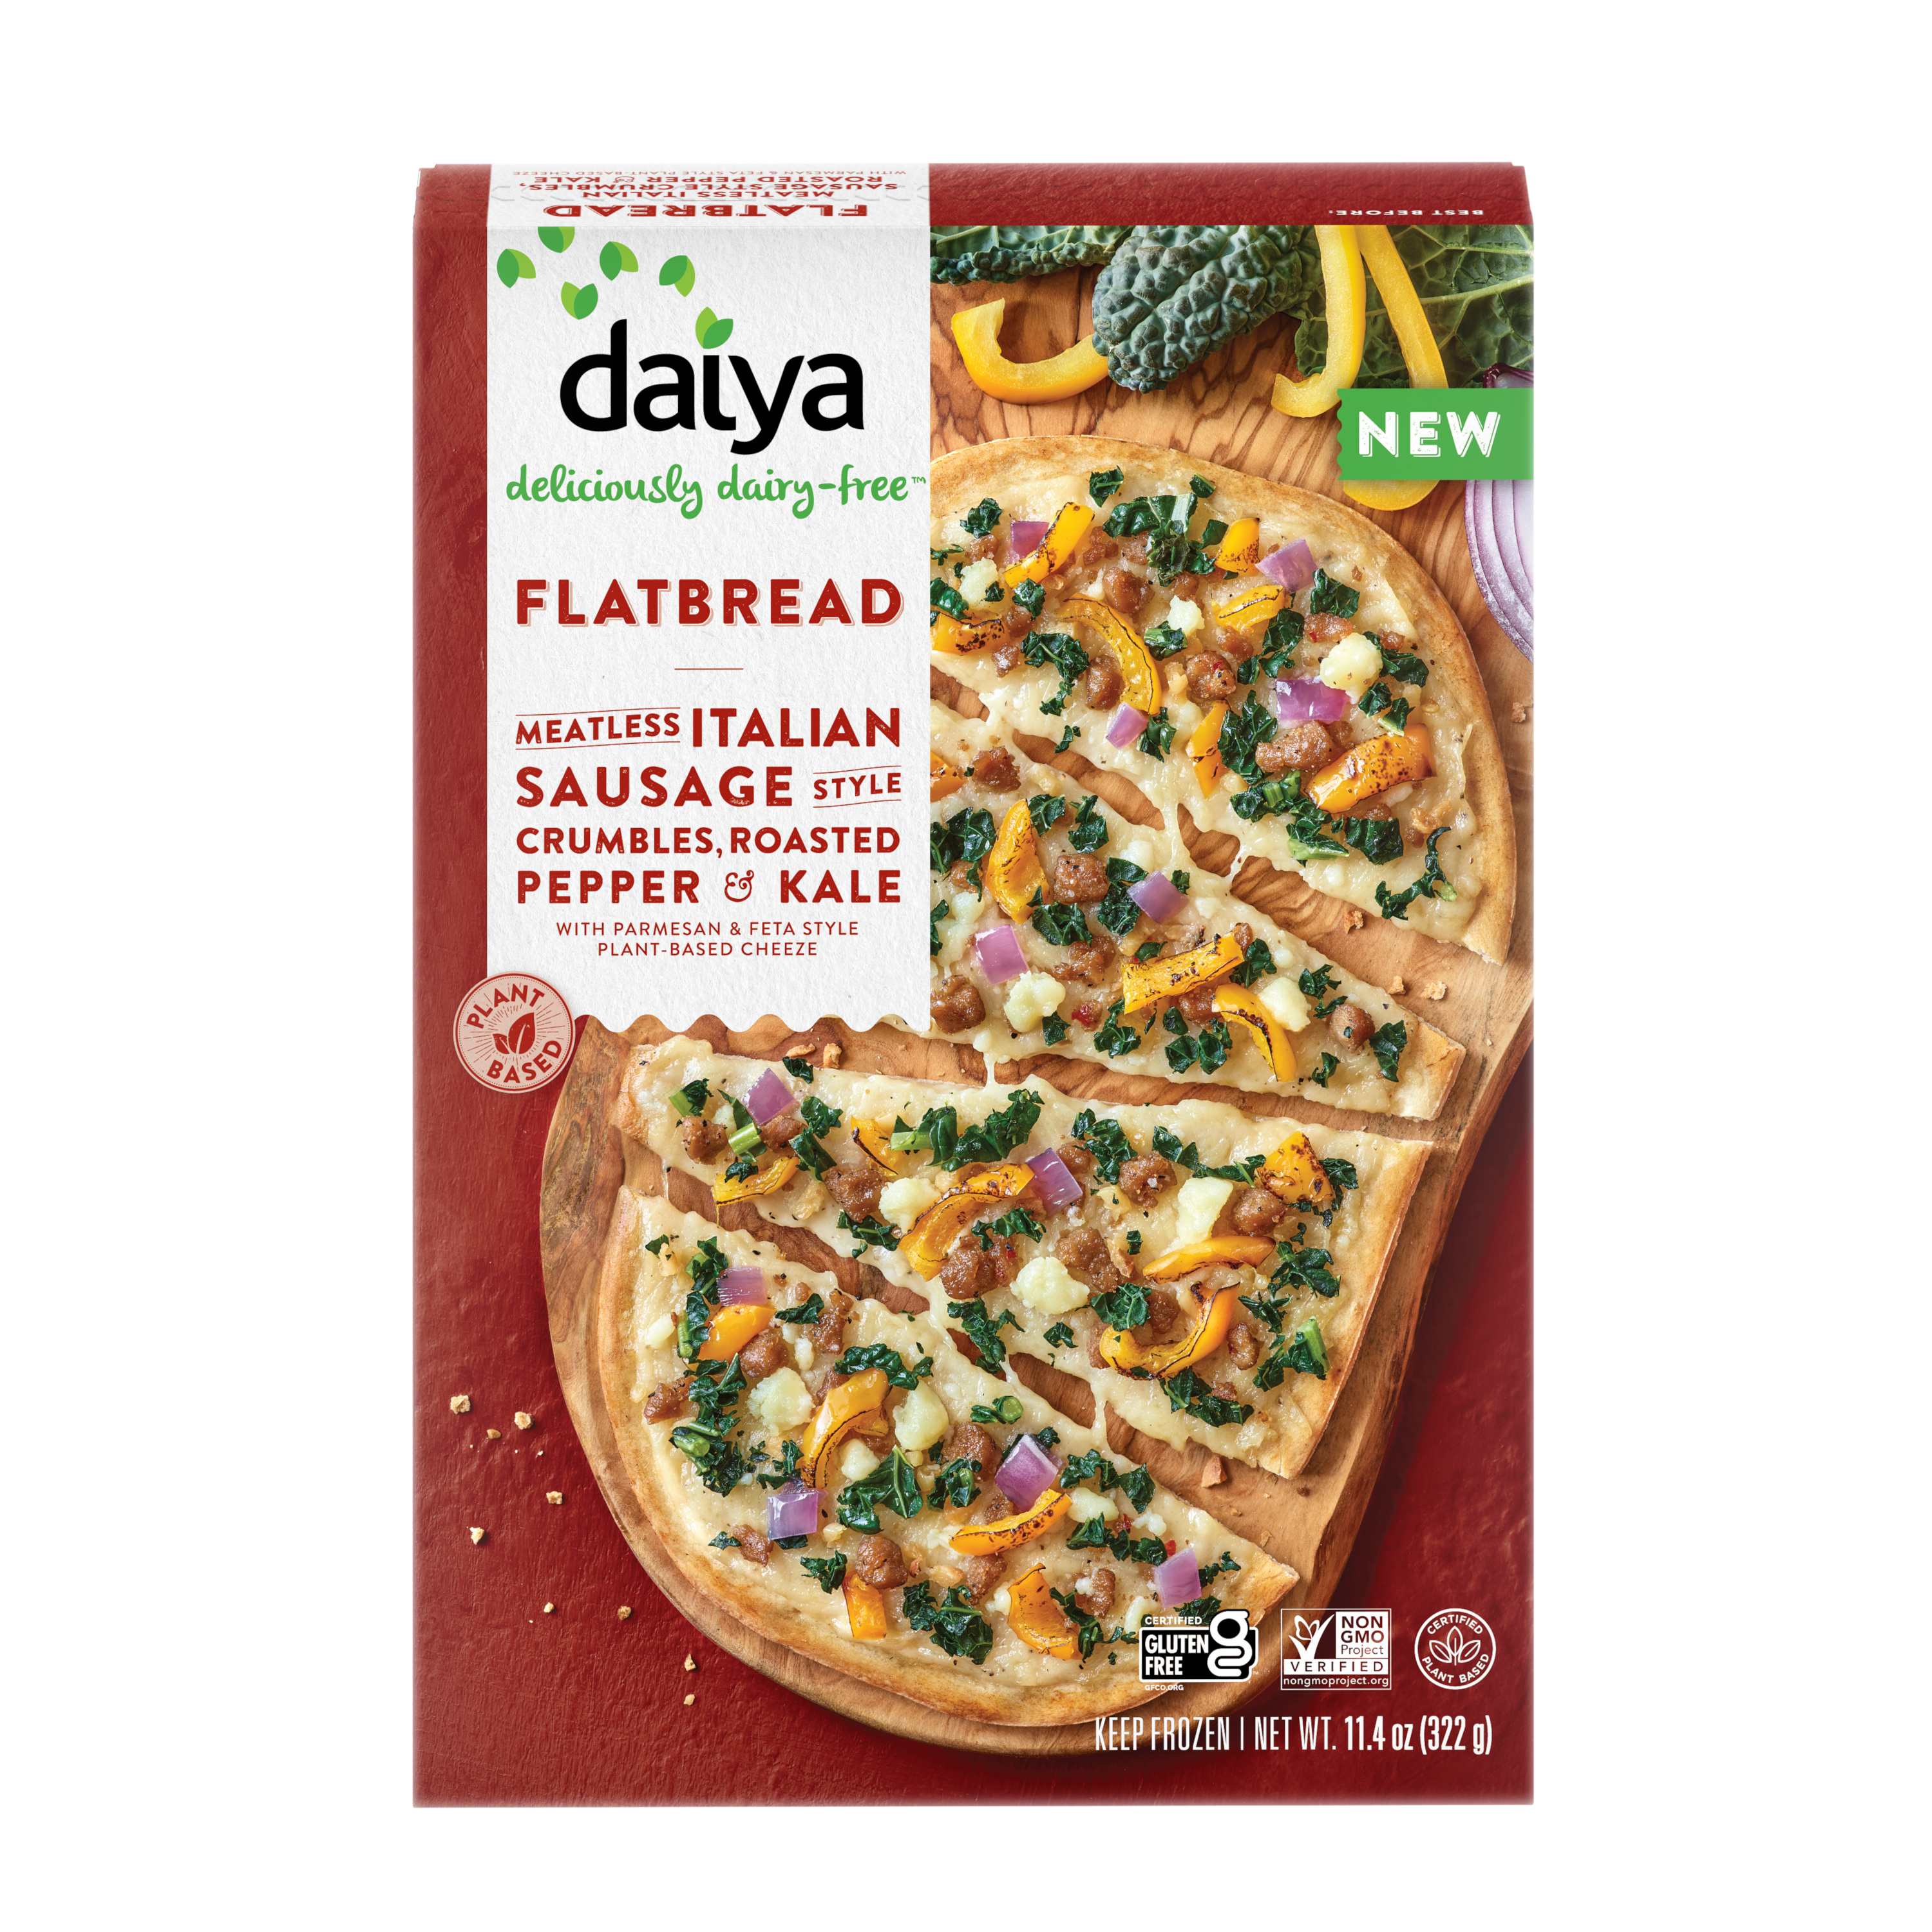 Daiya Foods Meatless Italian Sausage Style Crumbles, Roasted Pepper & Kale Flatbread  8 units per case 324 g